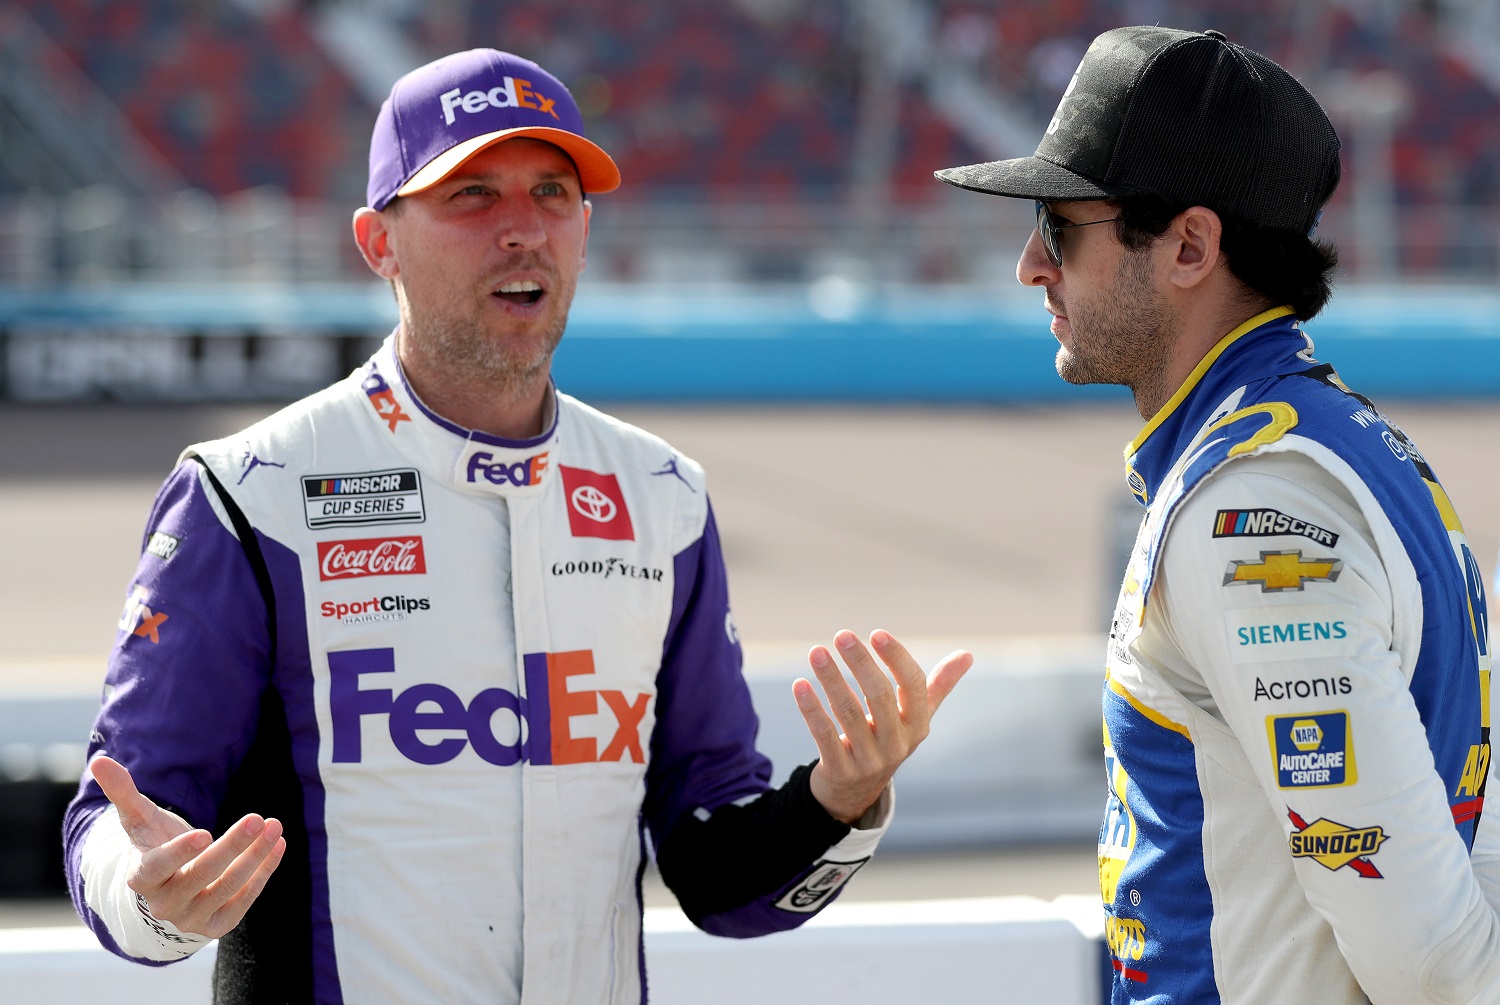 Denny Hamlin and Chase Elliott talk on the grid during qualifying for the NASCAR Cup Series Championship at Phoenix Raceway on Nov. 5, 2022. | Meg Oliphant/Getty Images